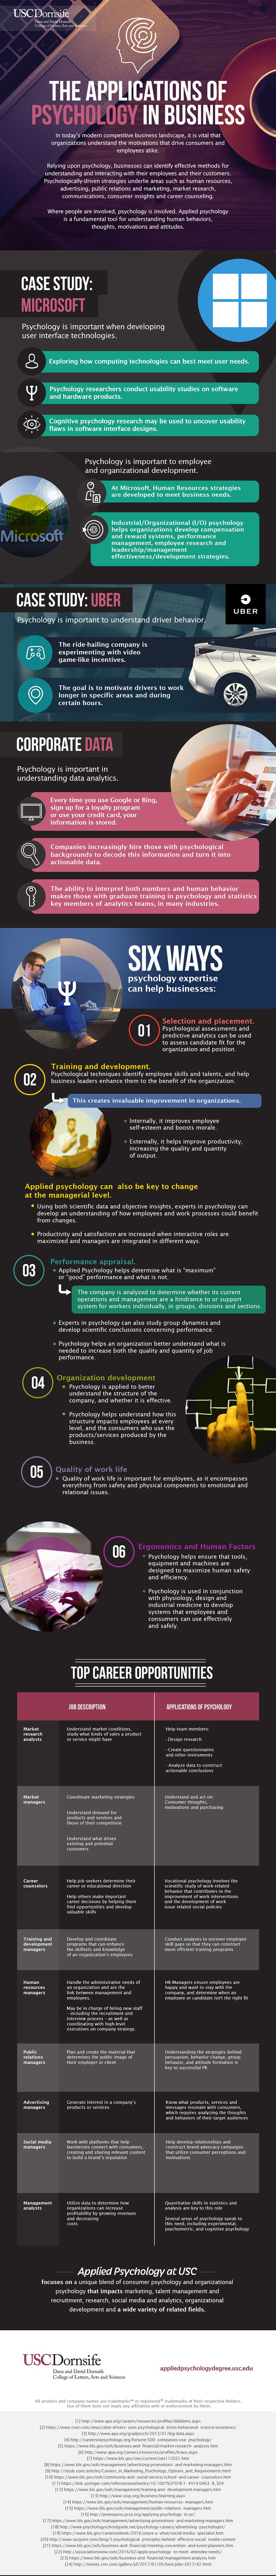 How Applied Psychology is Key to Business Development - Infographic